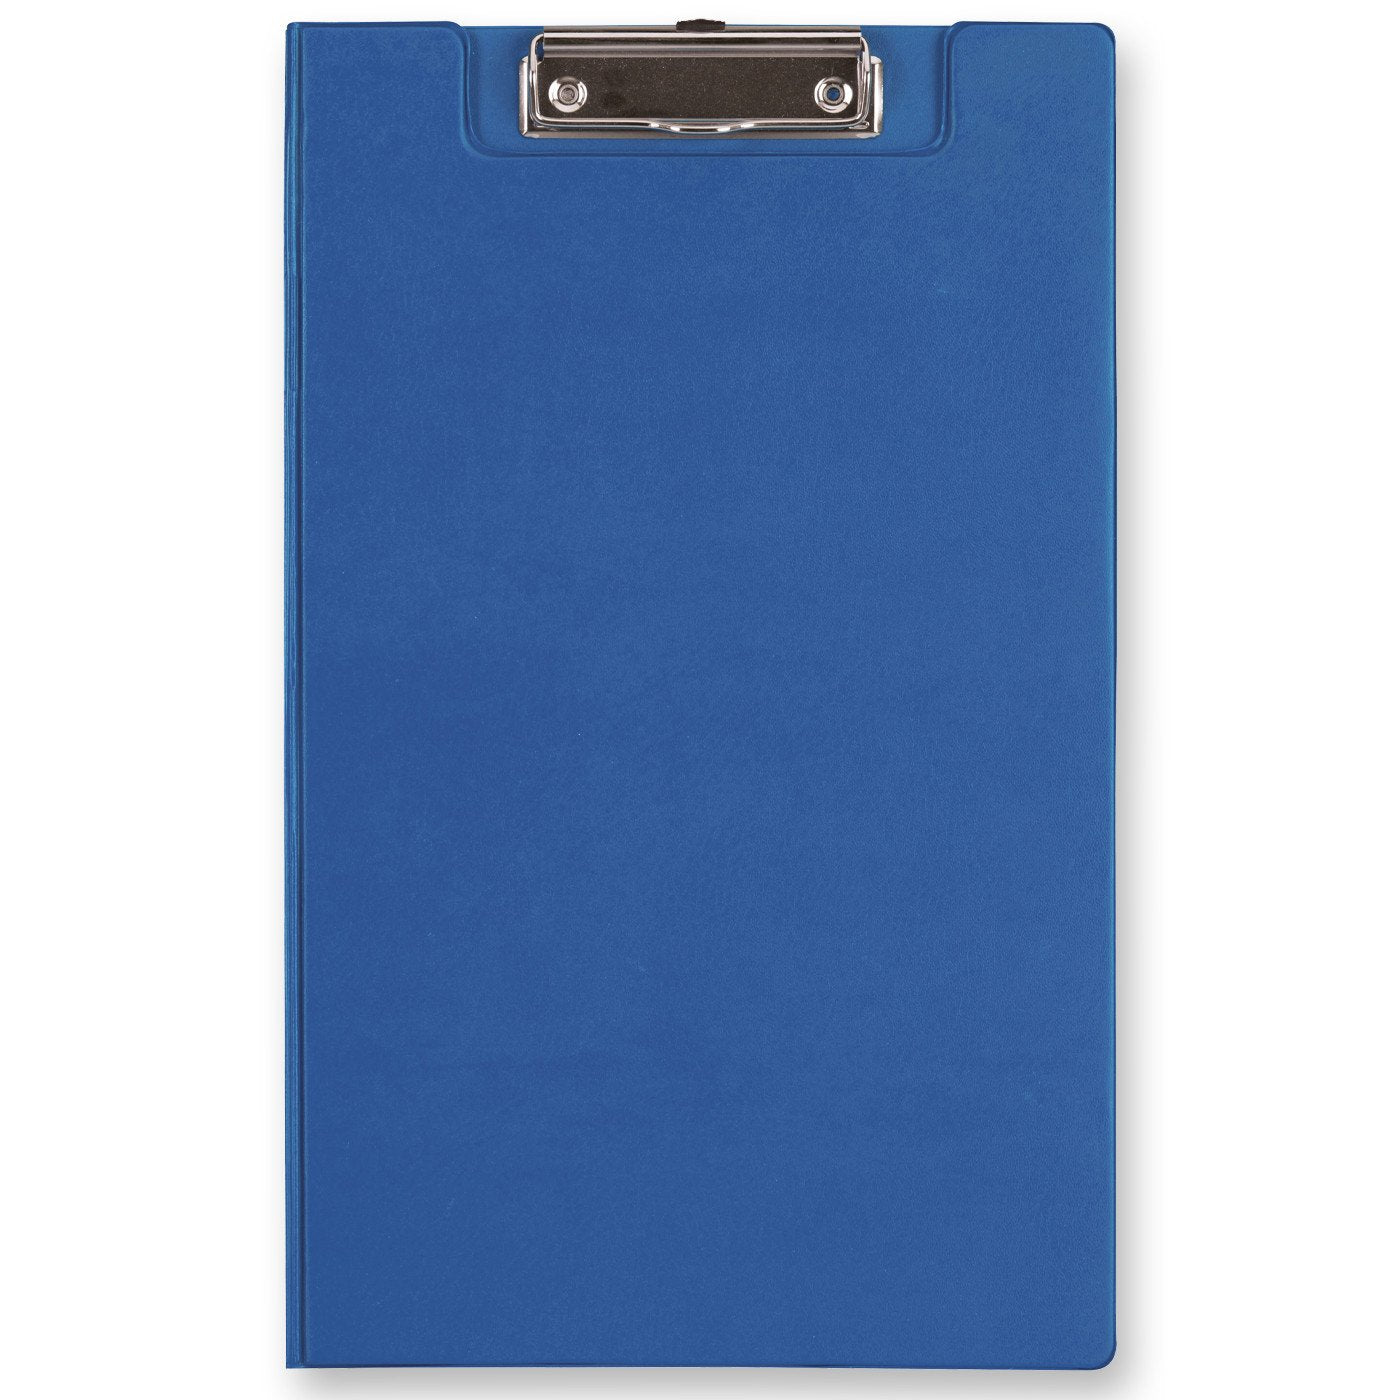 FM Clipboard with Flap Foolscap Blue